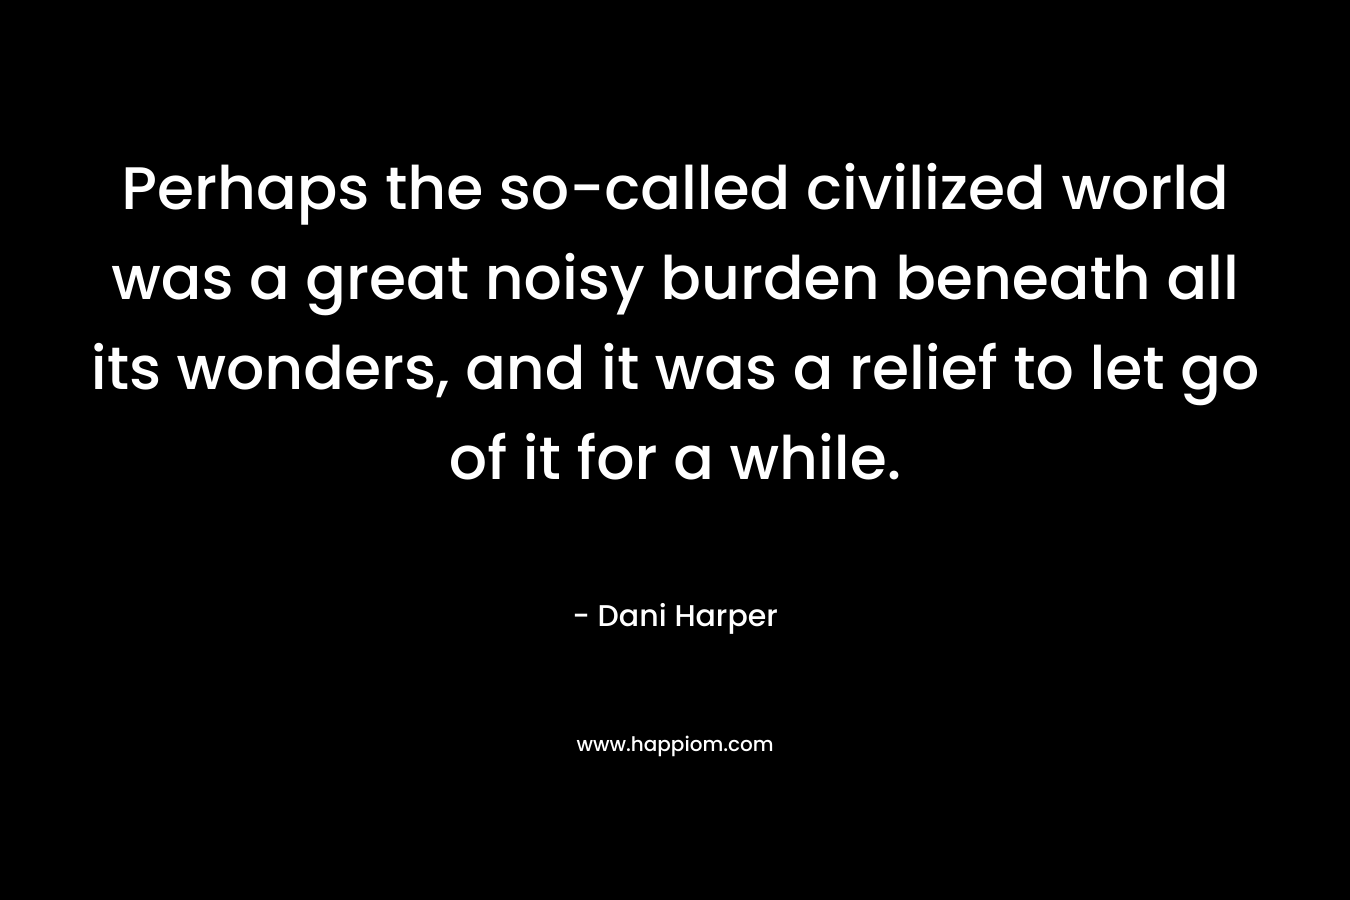 Perhaps the so-called civilized world was a great noisy burden beneath all its wonders, and it was a relief to let go of it for a while.